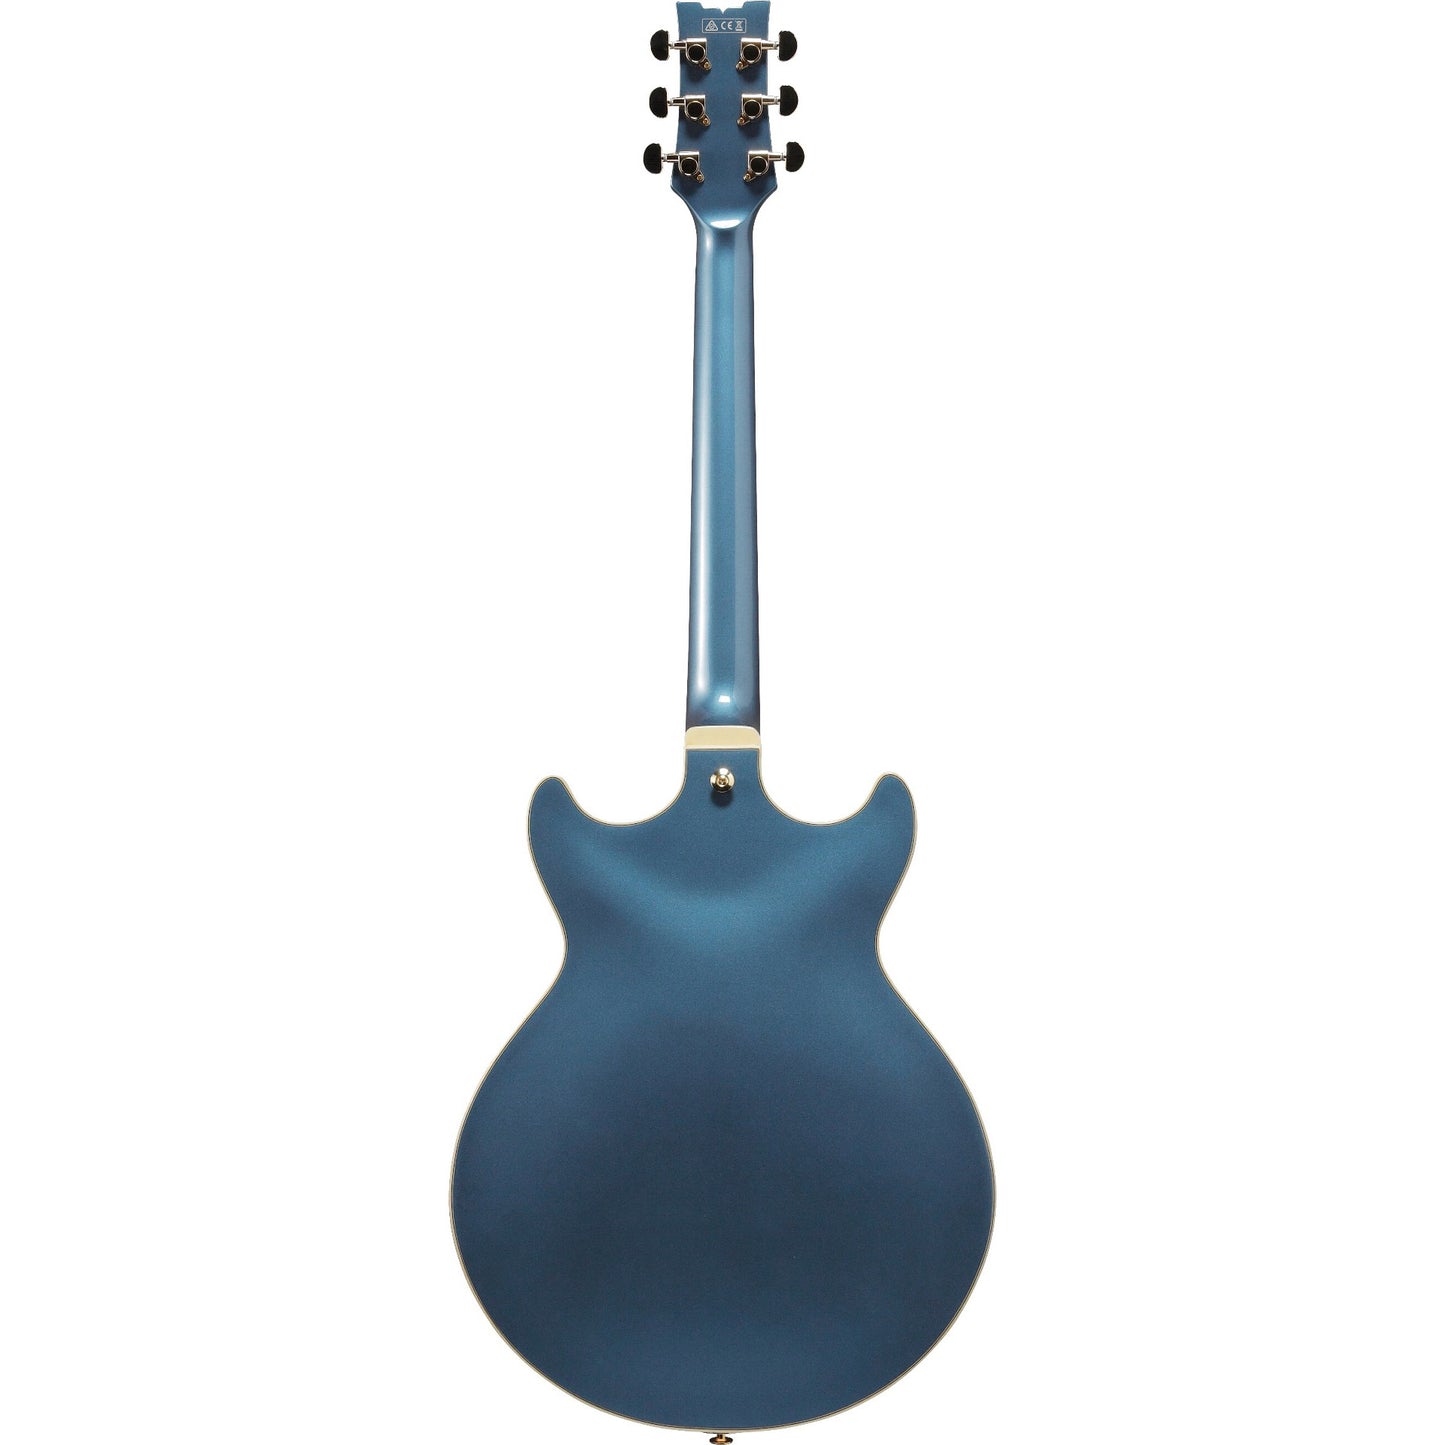 Ibanez AMH Artcore Expressionist Full-hollow Electric Guitar, Prussian Blue Metallic